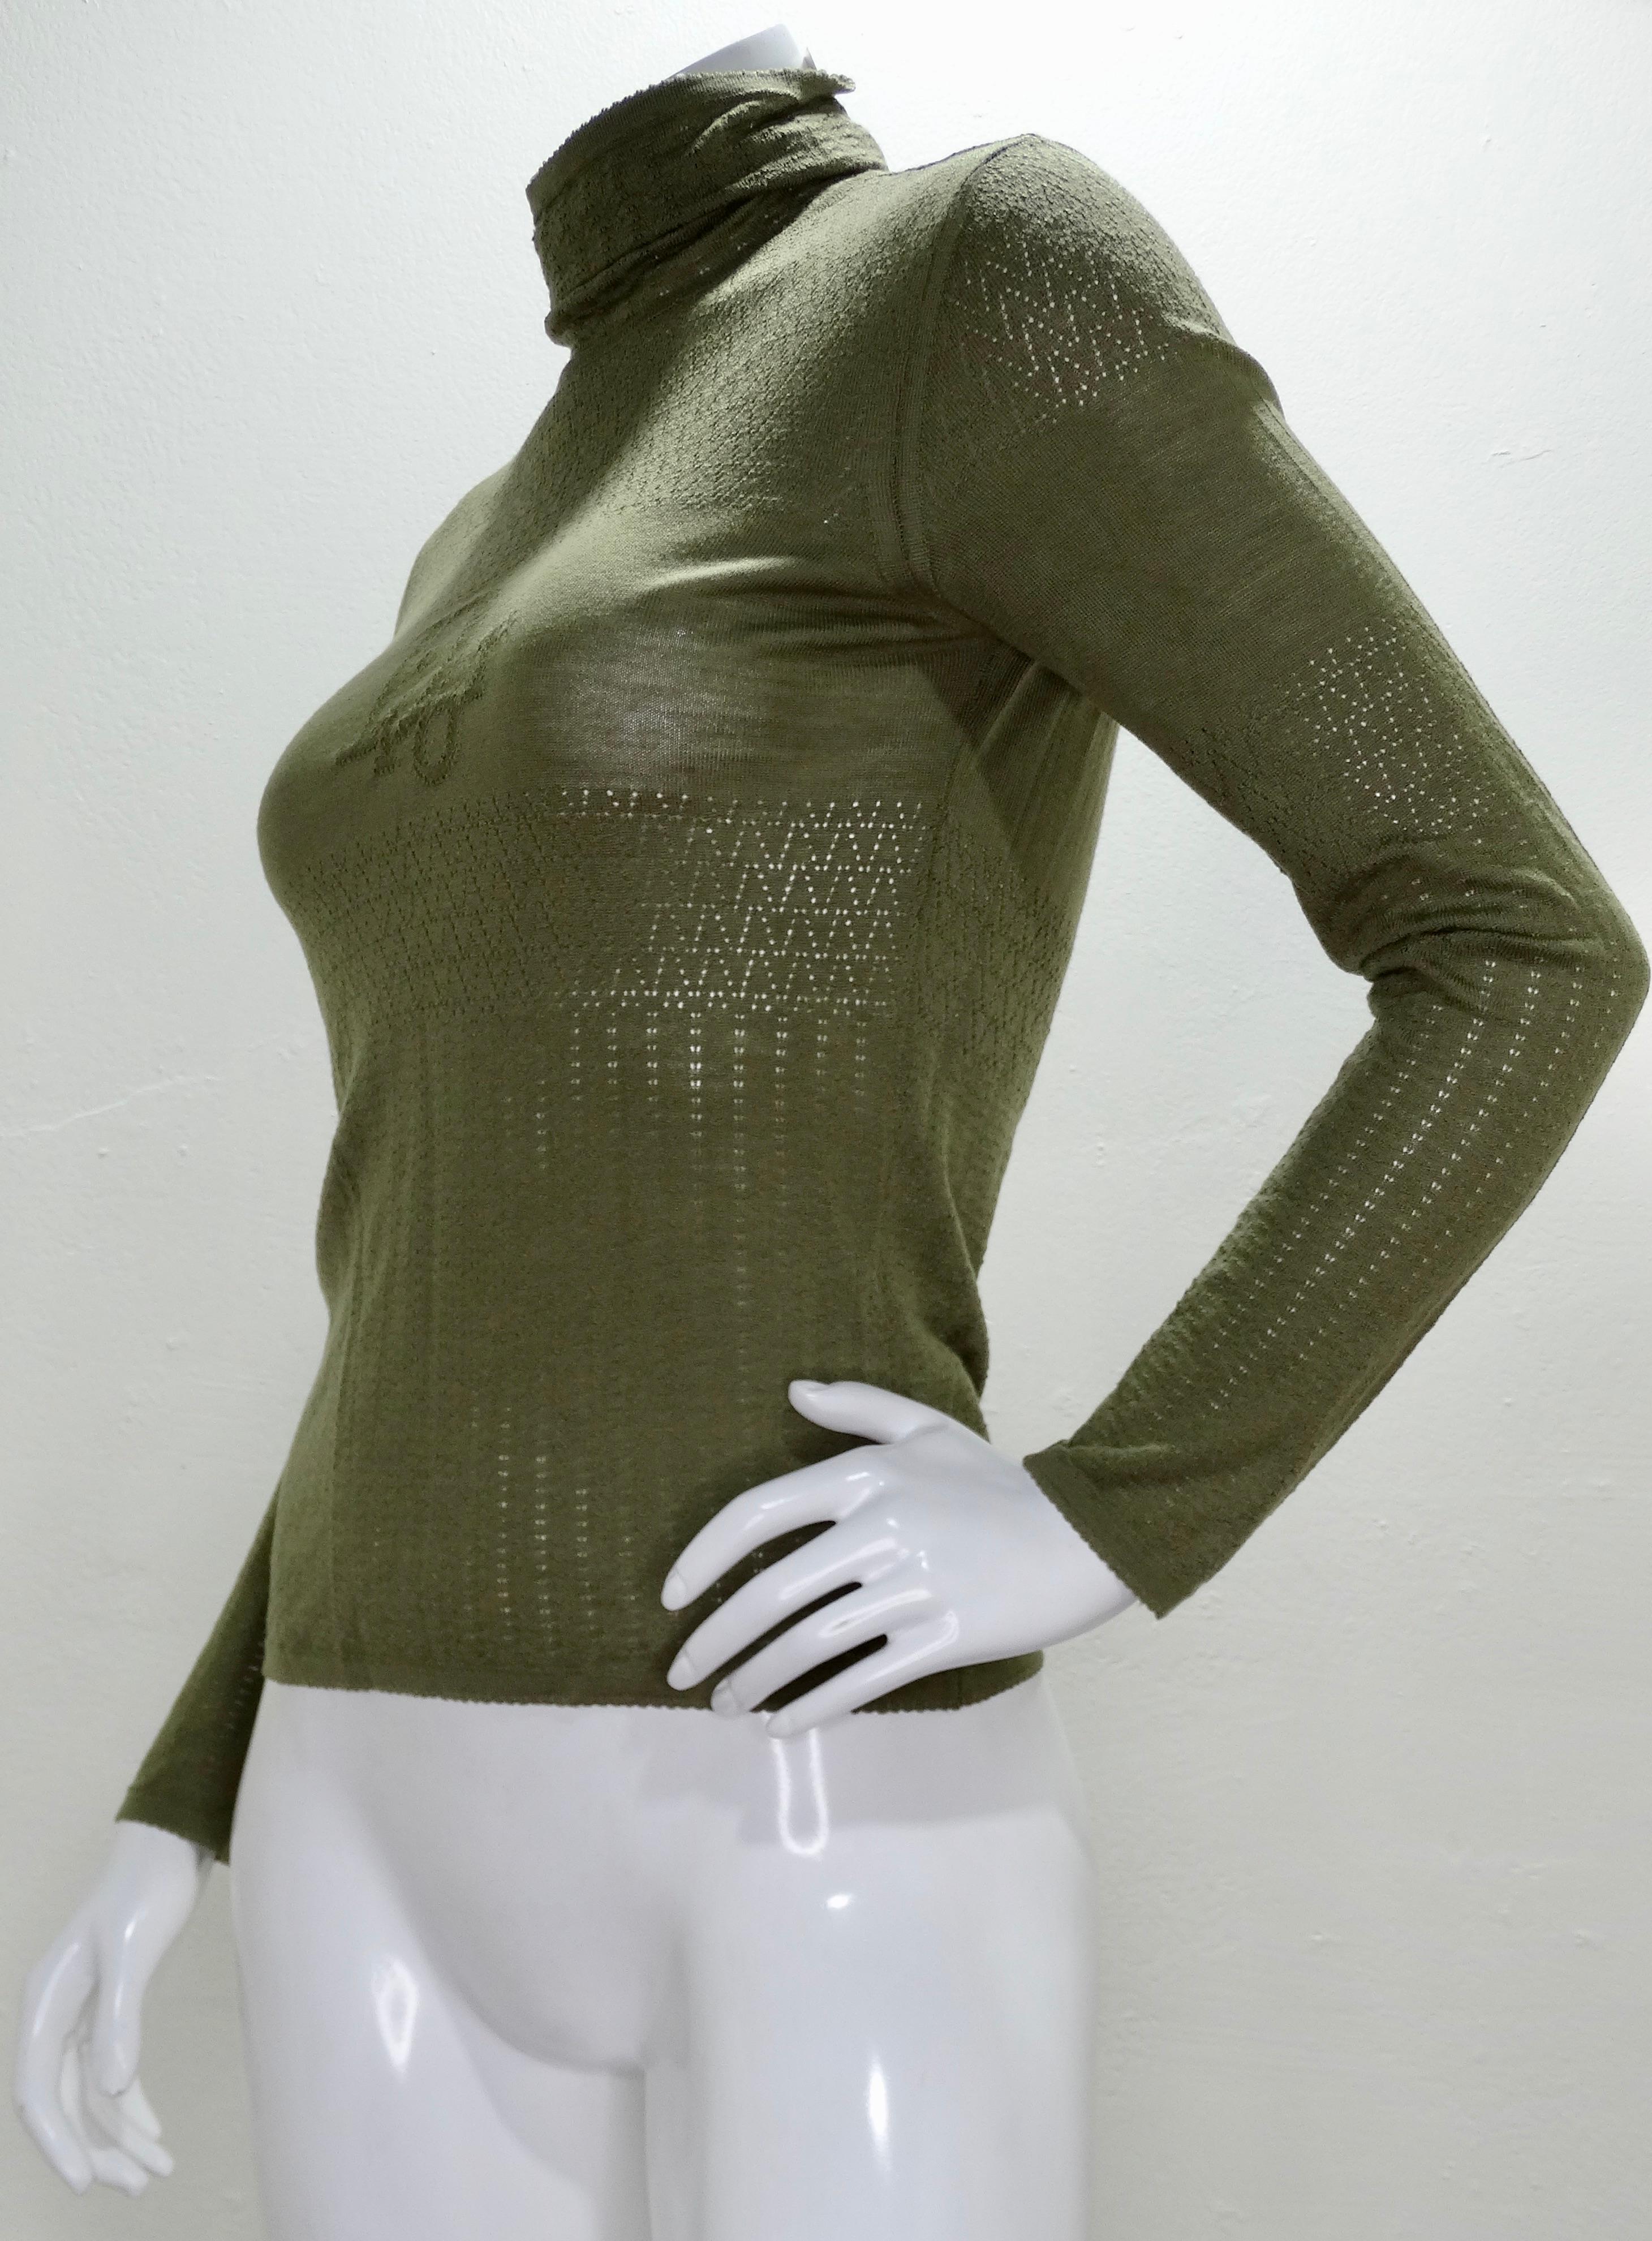 Take a piece from the Dior archives with this adorable turtle neck! Circa early/mid 1990s, this wool sweater is an olive green color and features a subtle crochet pattern with 'Dior' in the middle on the front and back. Marked a US size 6, best fit